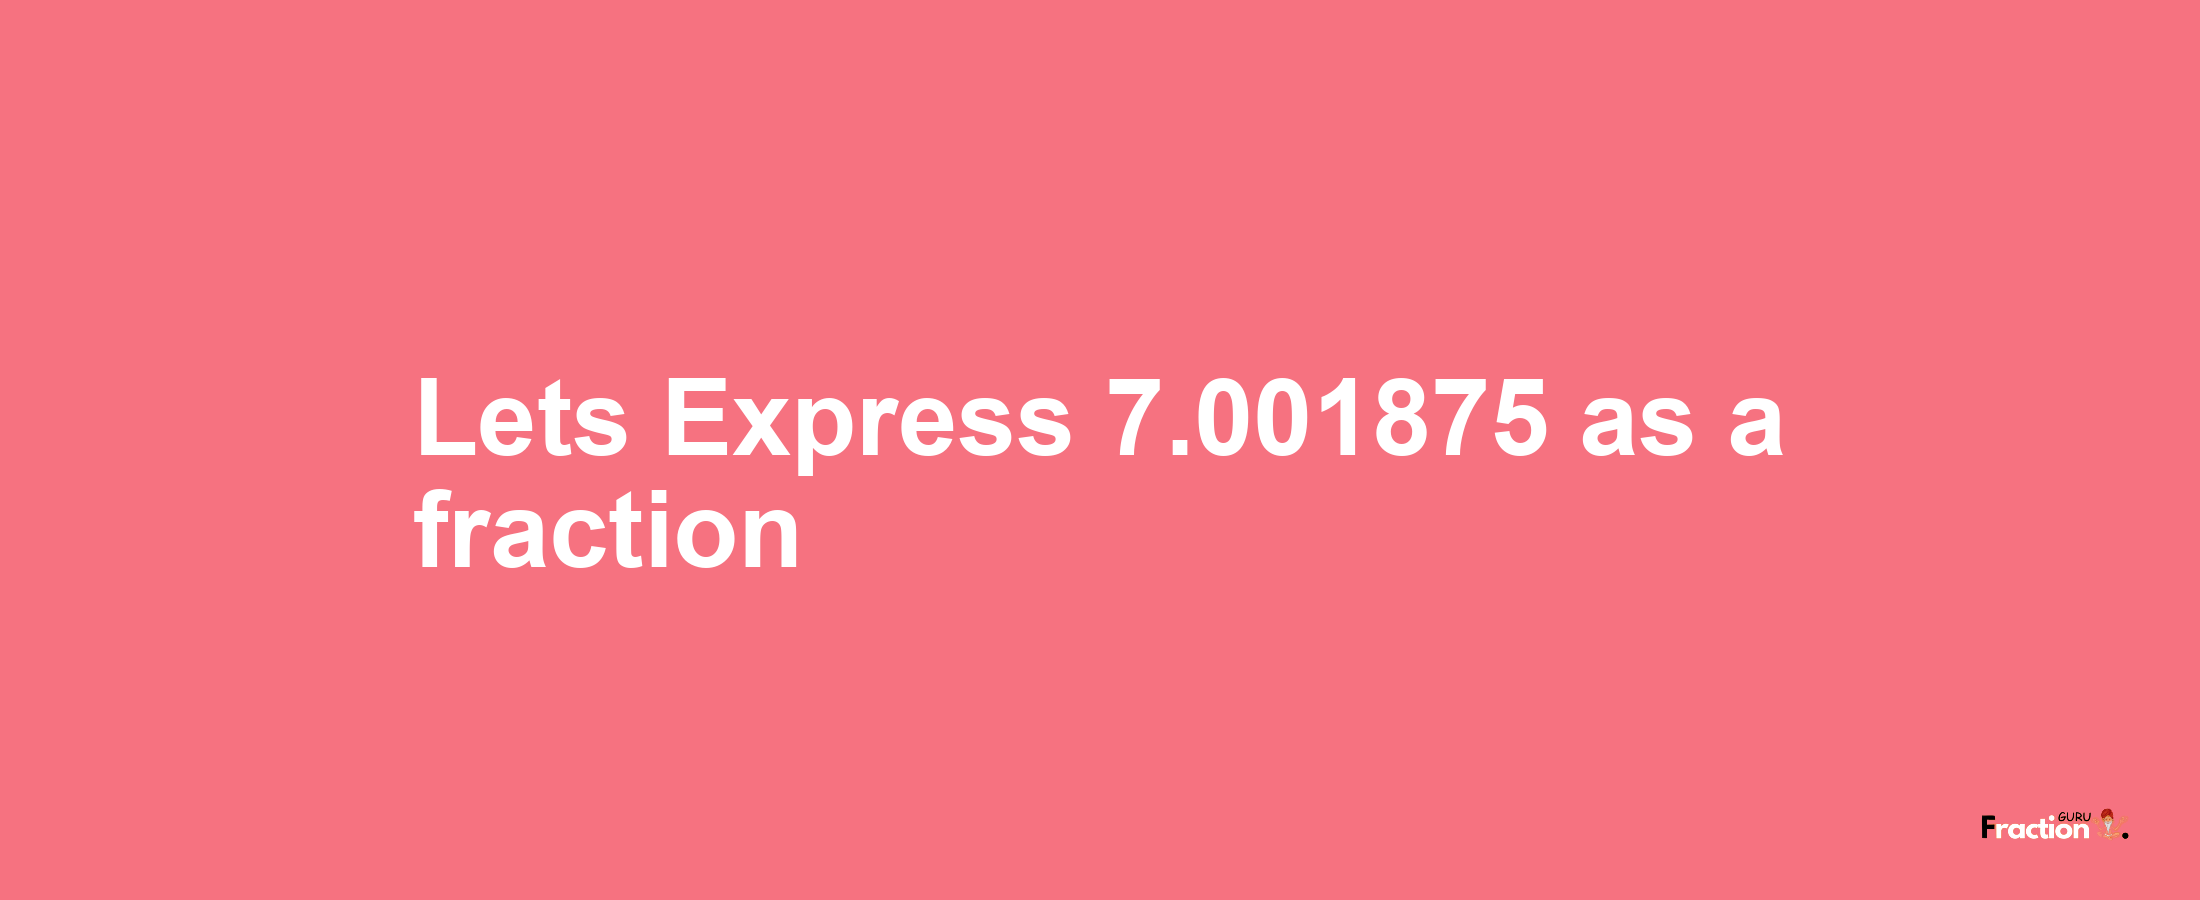 Lets Express 7.001875 as afraction